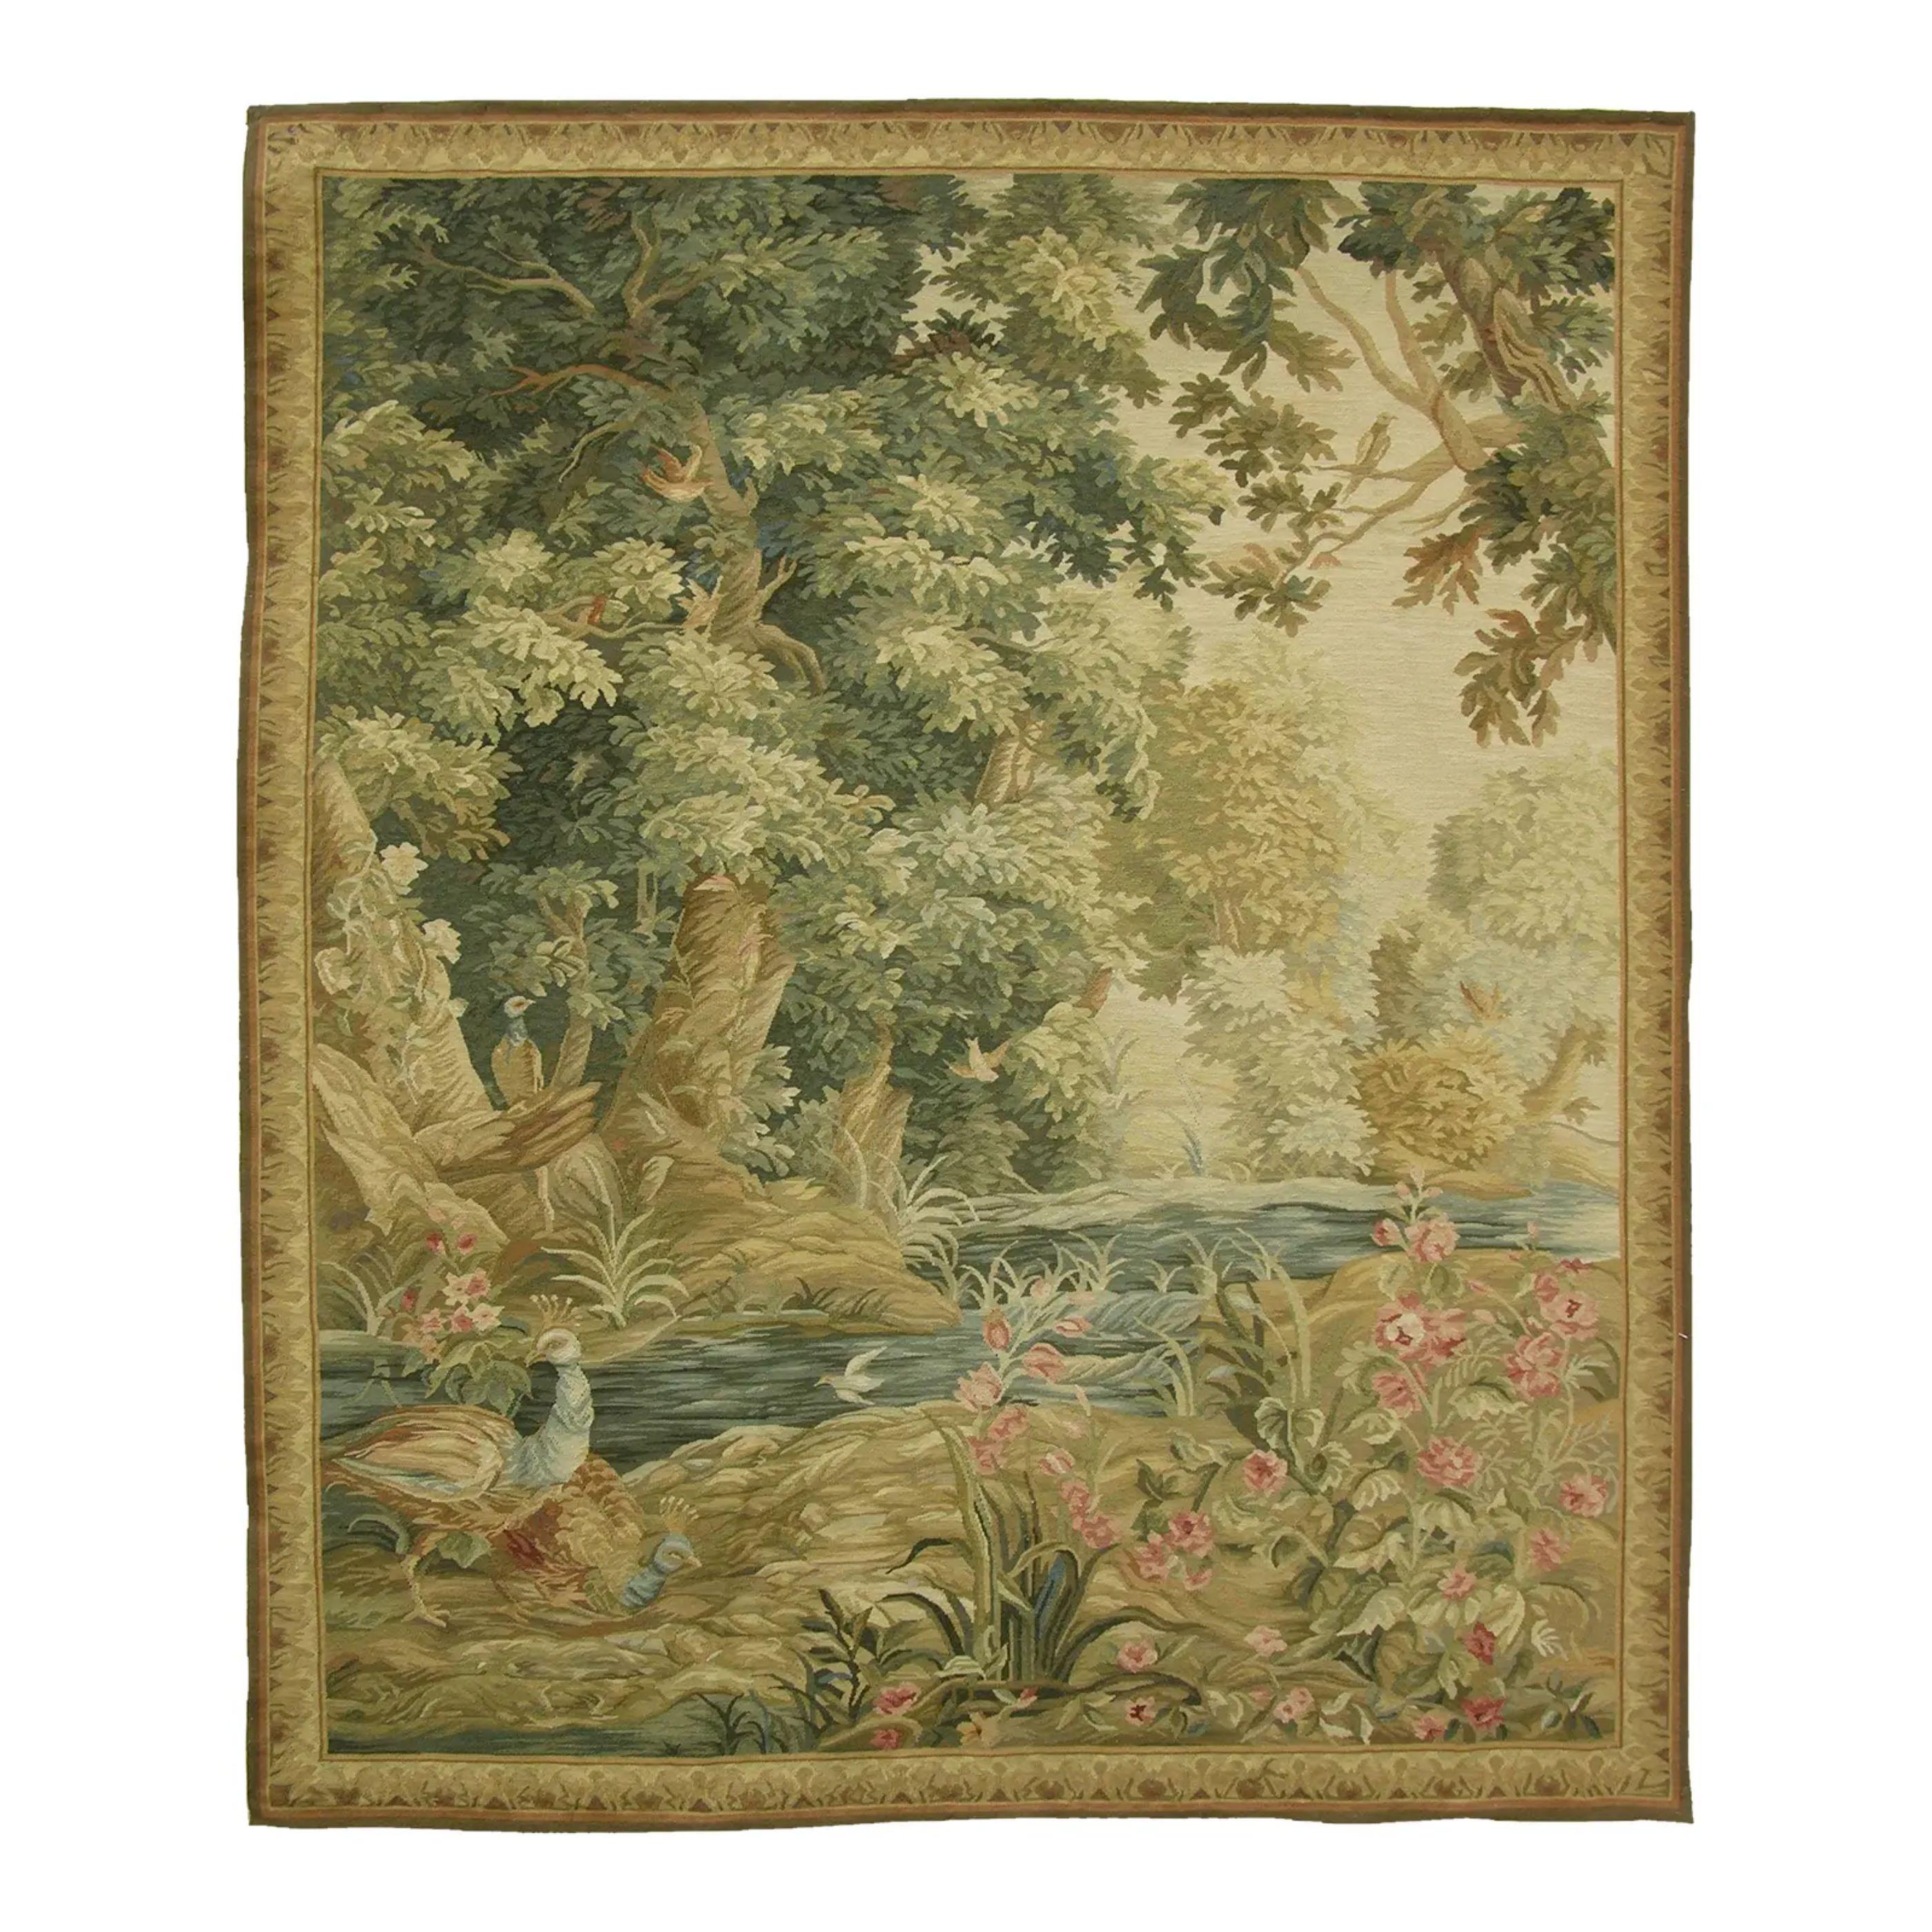 Vintage Woven Creek Tapestry 6.5X5.33 For Sale